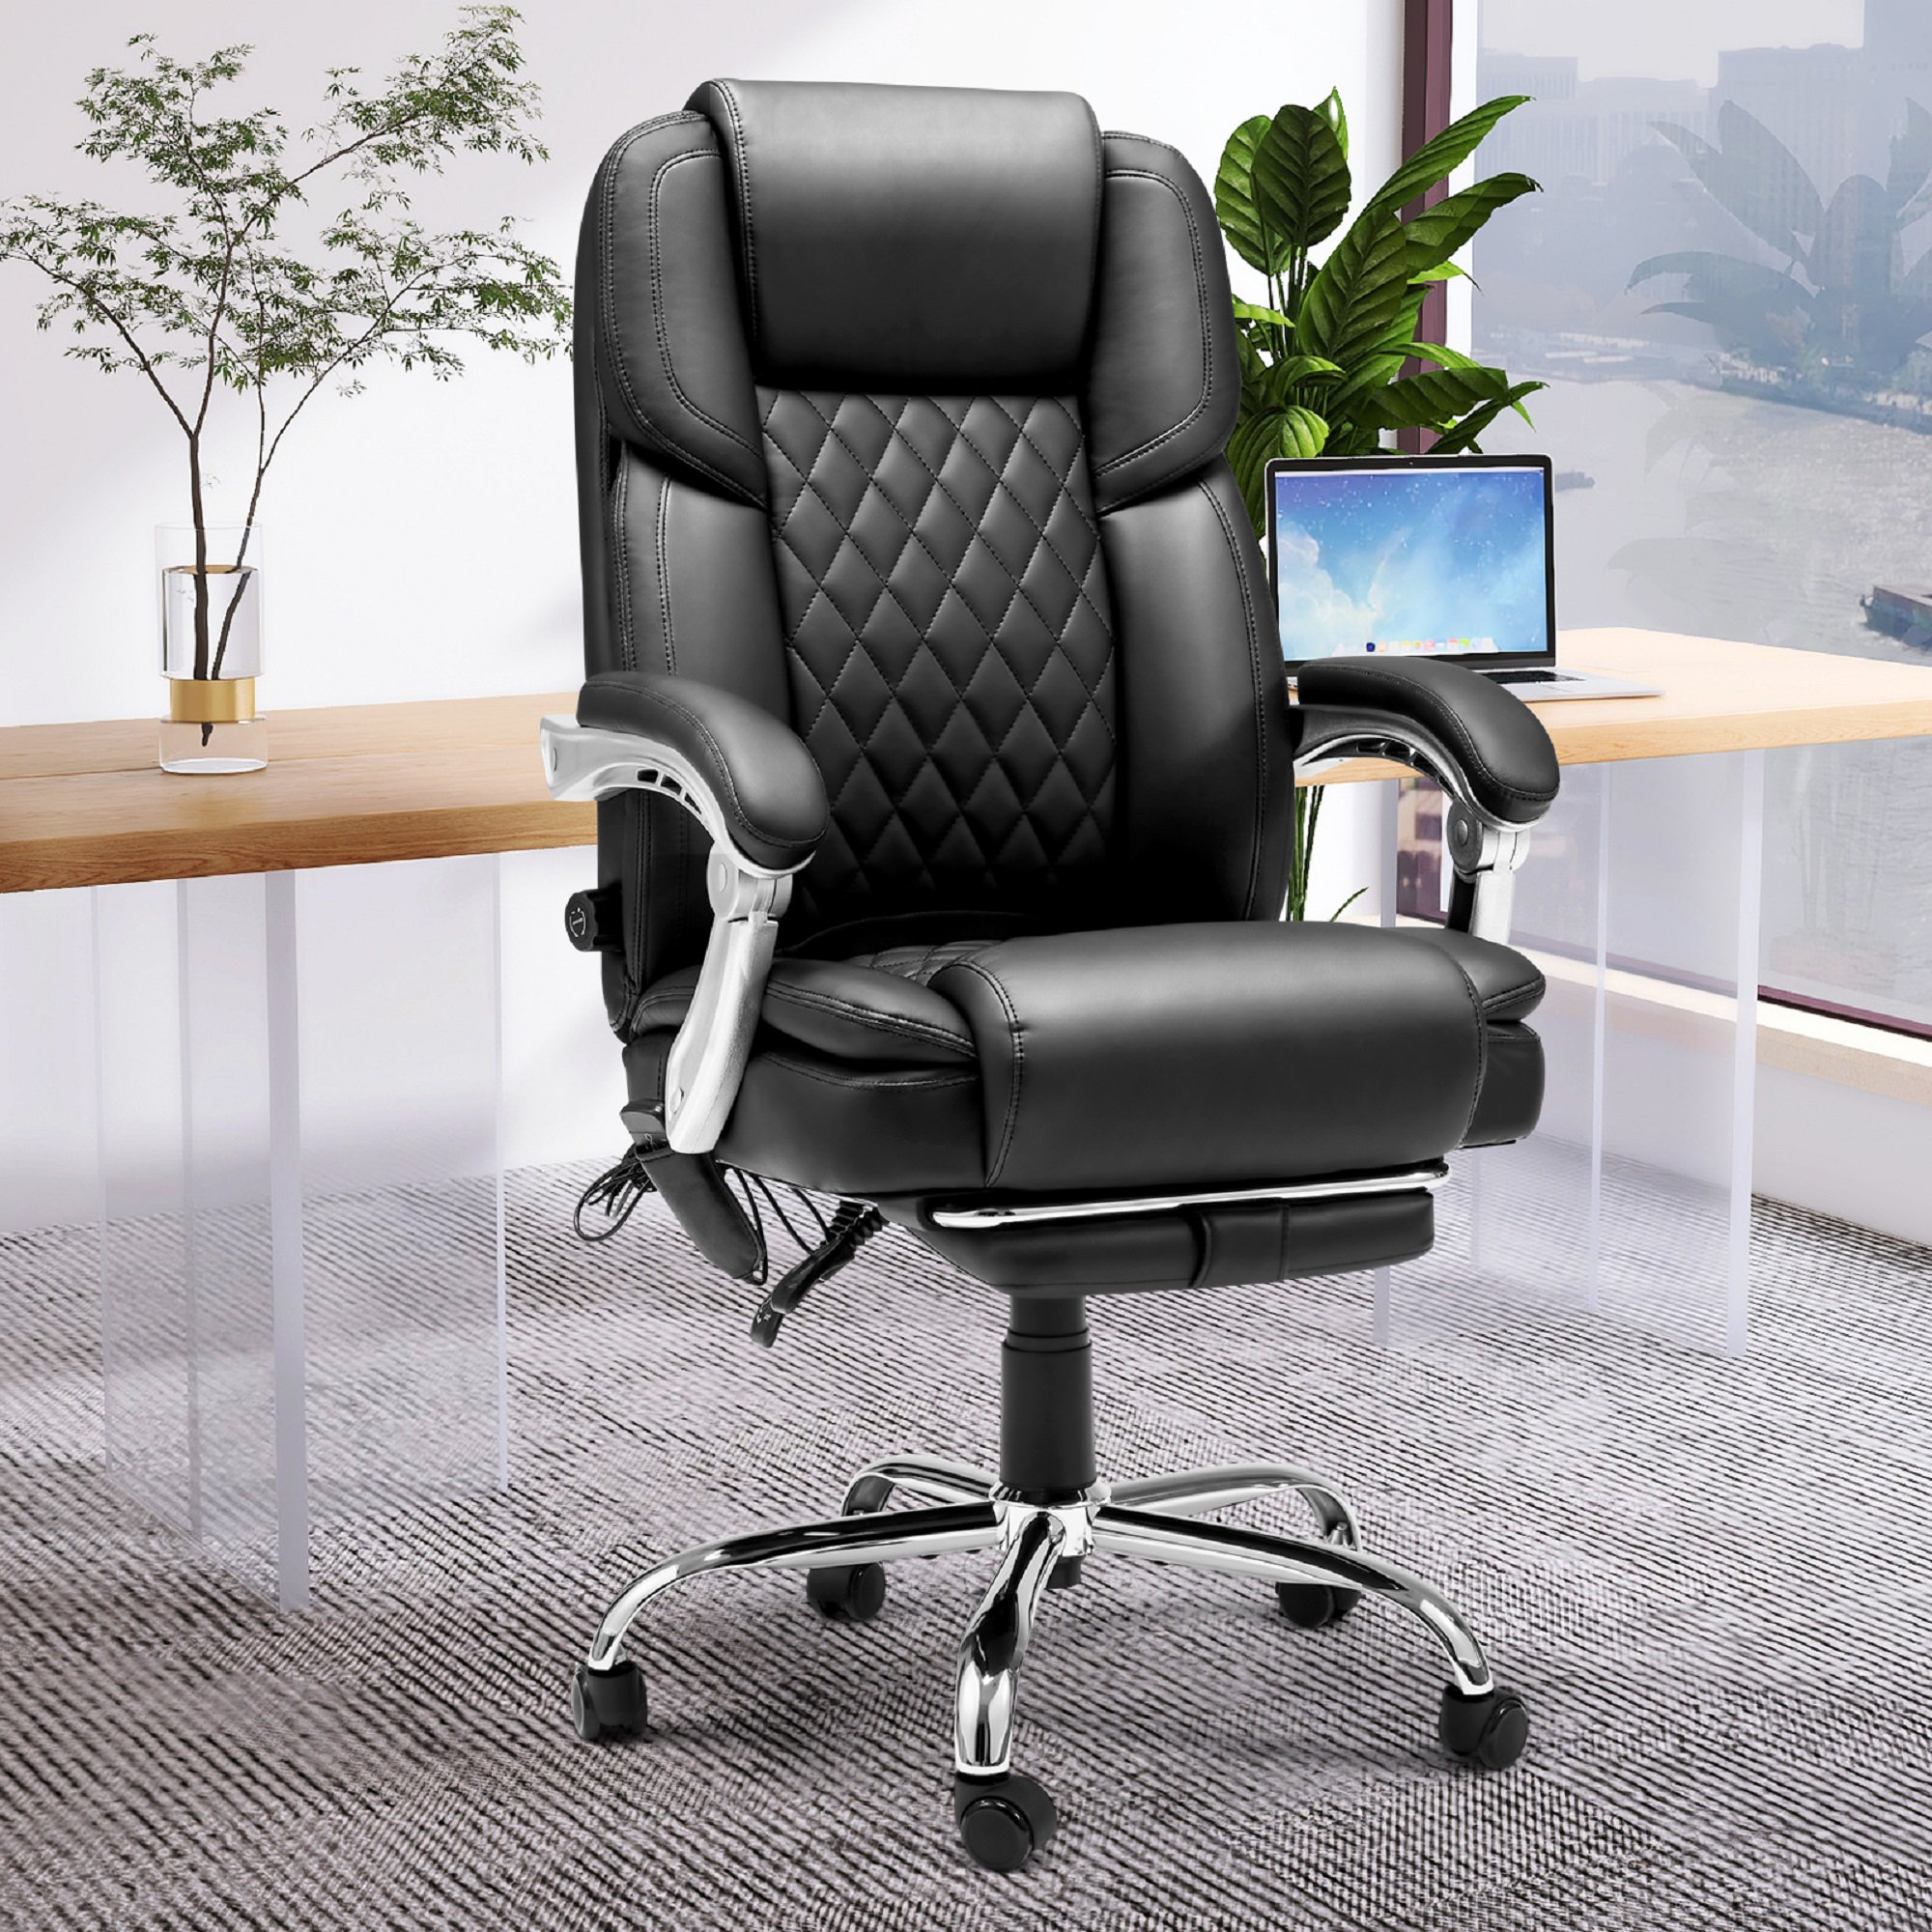 Chair Cushion, Desk Chair Cushion with Straps, Soft Chair Mat Chair Seat Pad  with Backrest for Office, Home, Bedroom, Dorm - AliExpress